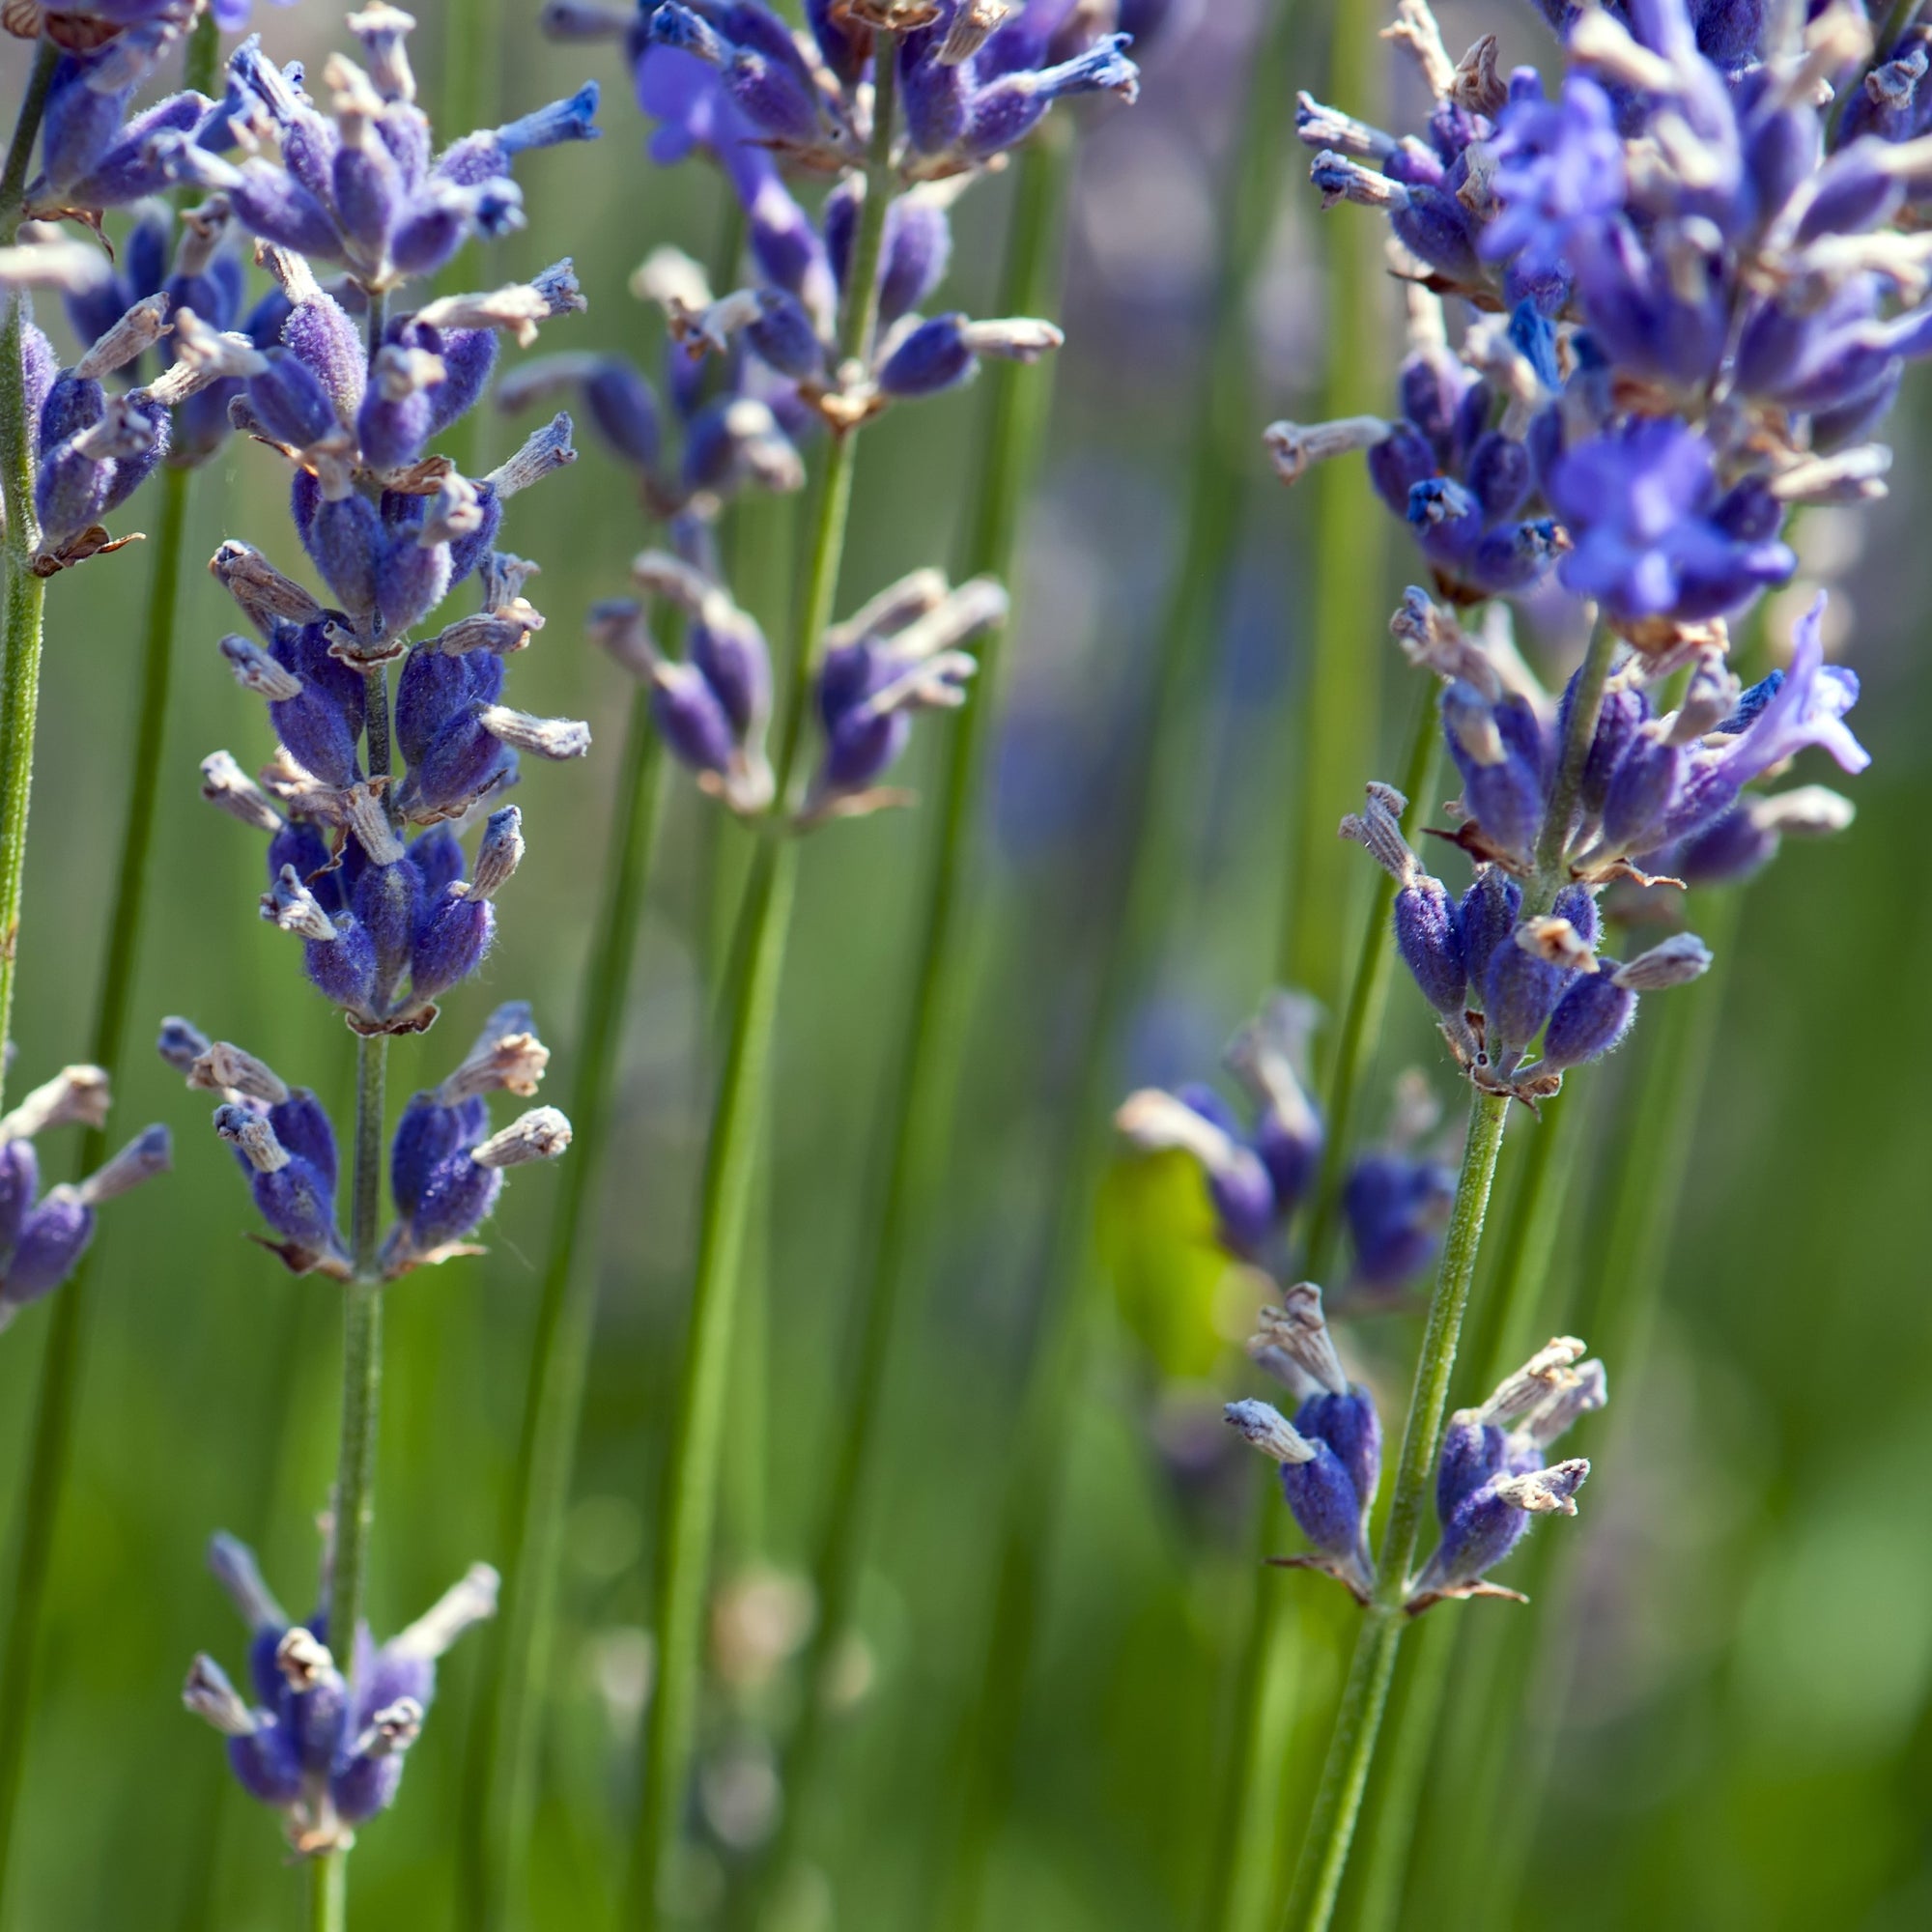 Some species of lavender grow well in Texas